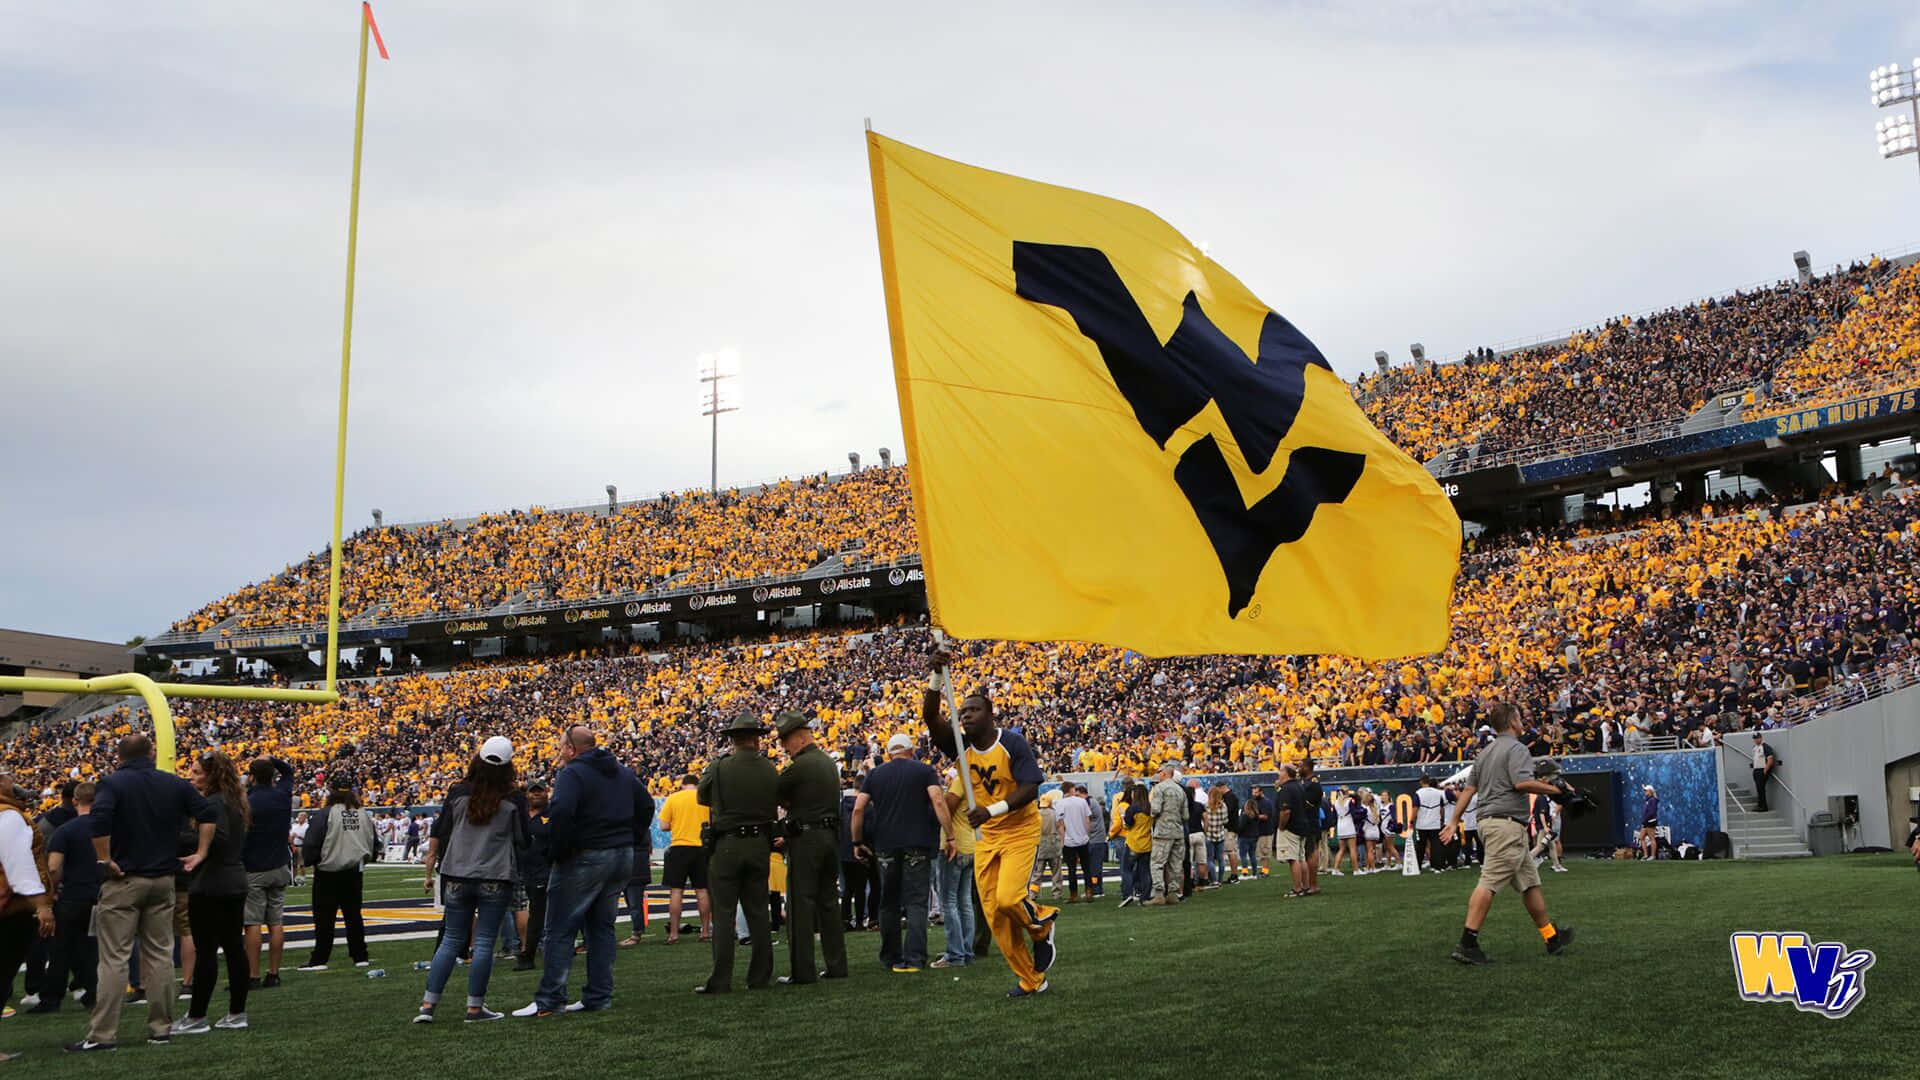 A Large Yellow Flag Is Held Up By A Crowd Of People Background